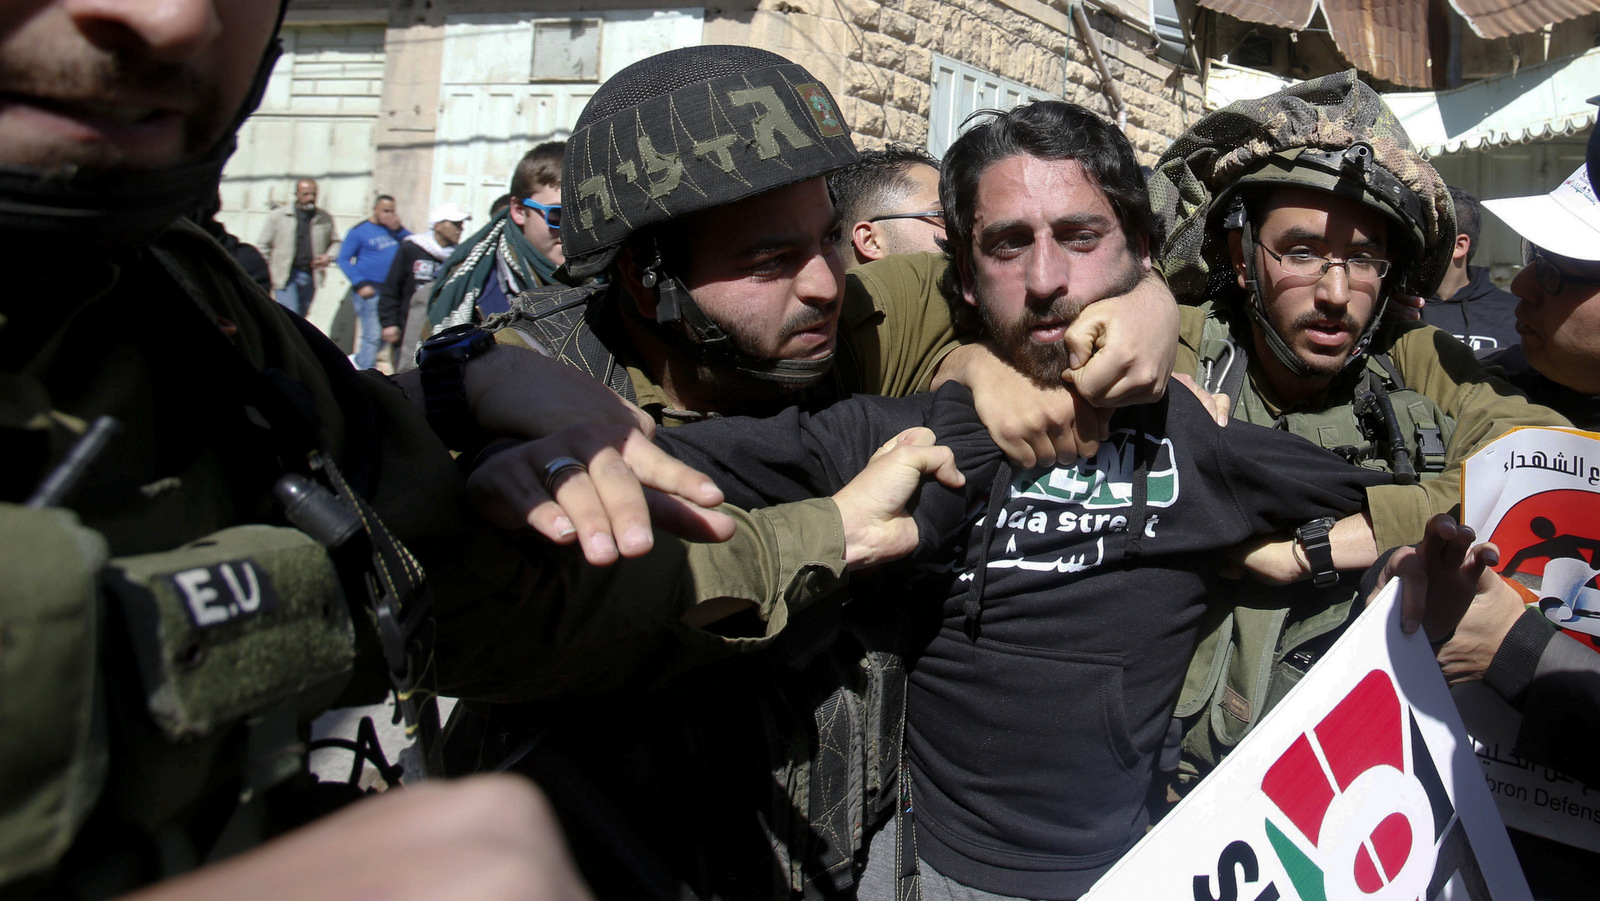 Israeli soldiers arrest a Youth Against Settlements protester demanding the reopening of Shuhada Street in the West Bank city of Hebron, Feb. 27, 2015. Israel closed Shuhada Street for Palestinians in 1994 after an Israeli killed 29 Palestinians and wounded over a 100 praying in a mosque. (AP/Nasser Shiyoukhi)